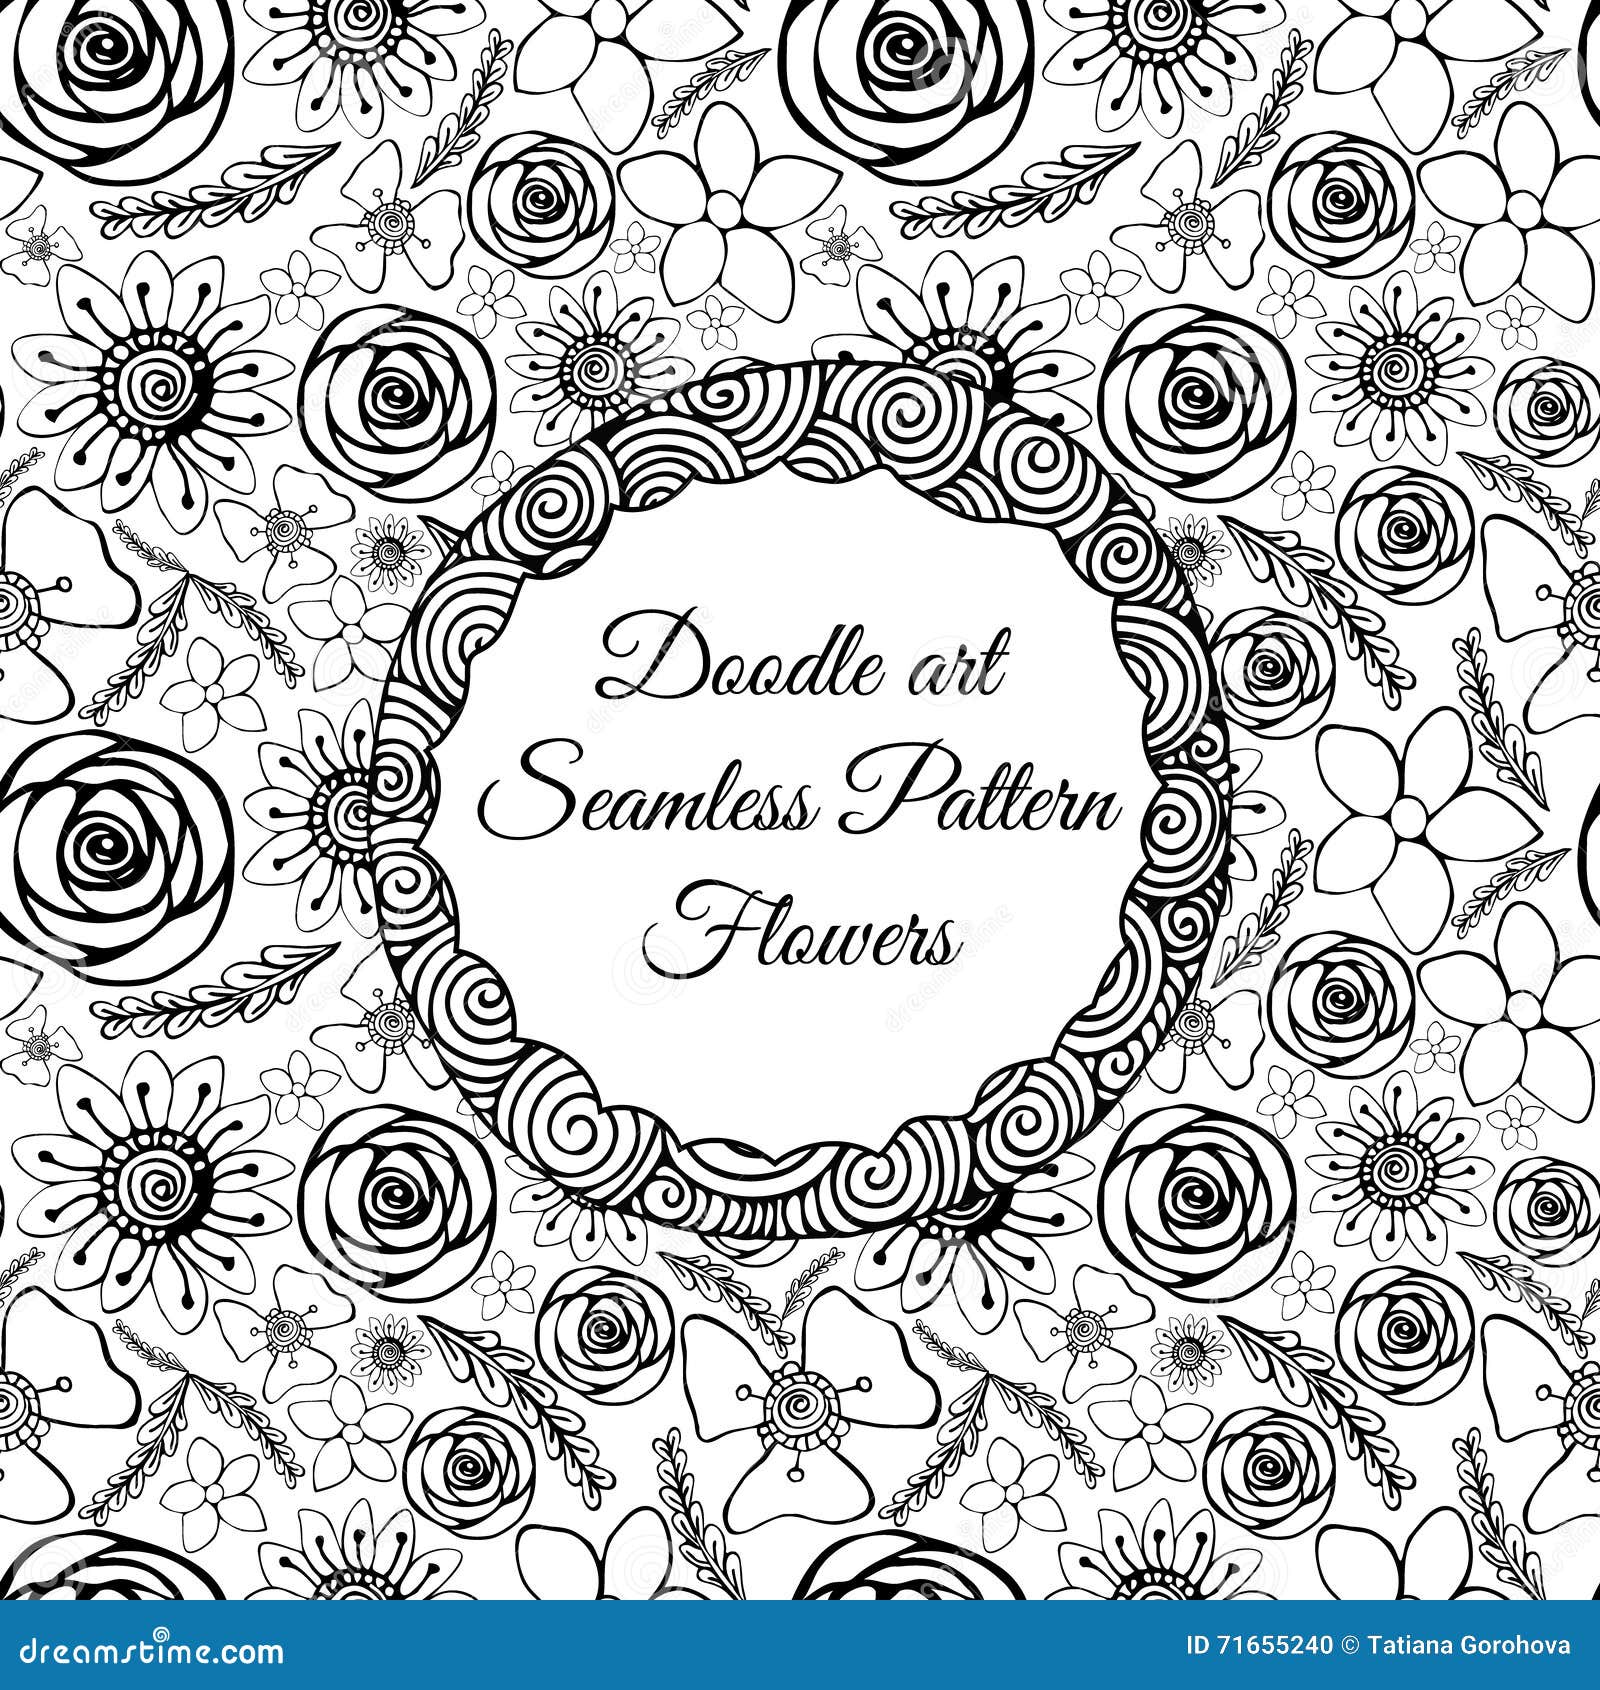 Doodle Art Abstract Seamless Pattern With Flowers Vector